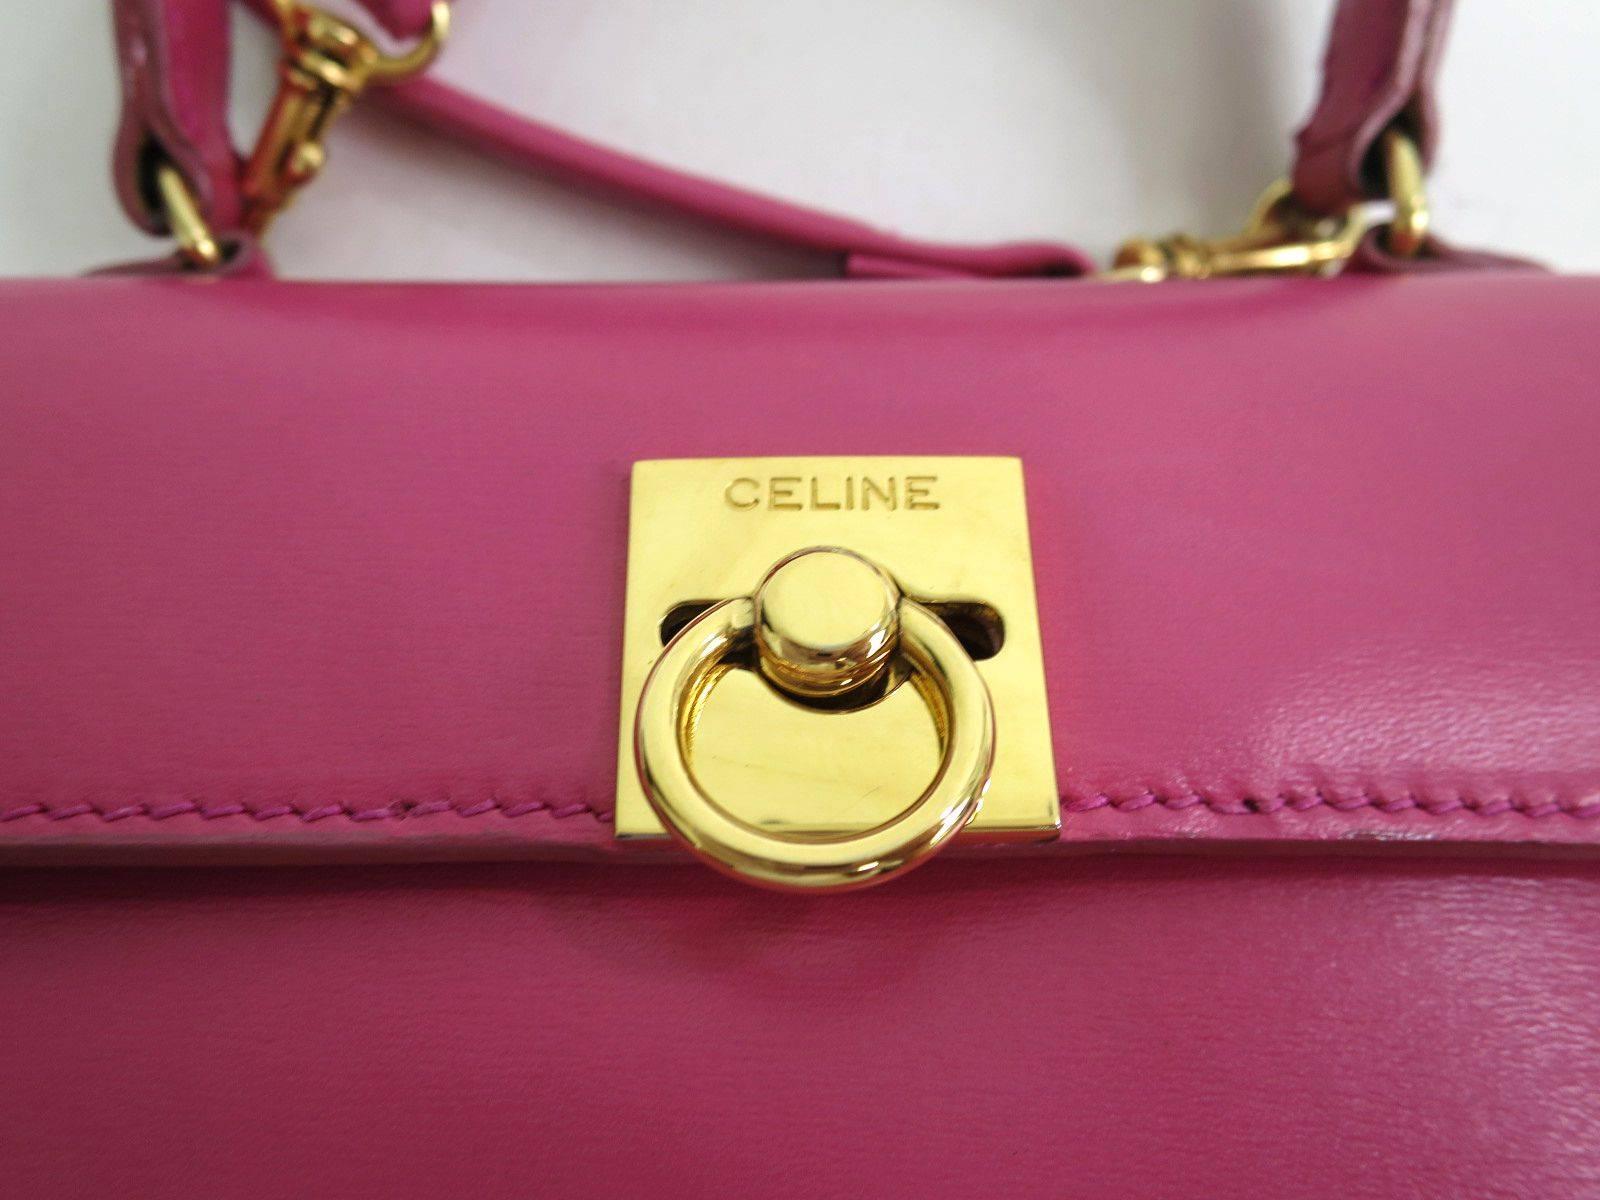 CURATOR'S NOTES

If you missed out on our other Celine box Kelly style satchel bags, do not make the same mistake thrice with this eye popping pink version! Expecting a quick sale on this beauty.

Leather
Gold hardware
Made in Italy
Measures